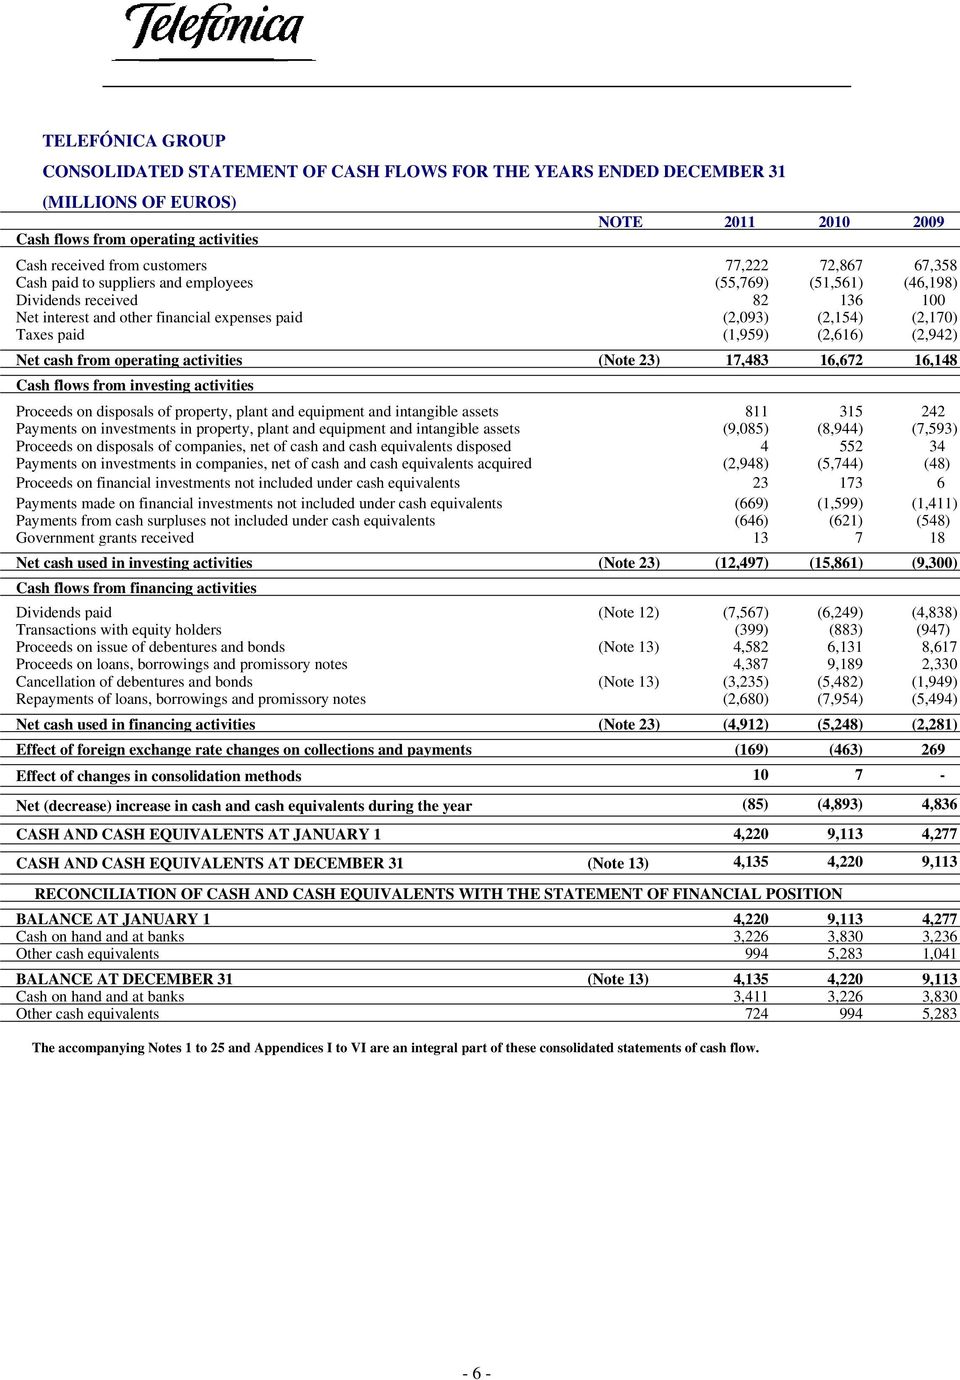 (2,616) (2,942) Net cash from operating activities (Note 23) 17,483 16,672 16,148 Cash flows from investing activities Proceeds on disposals of property, plant and equipment and intangible assets 811